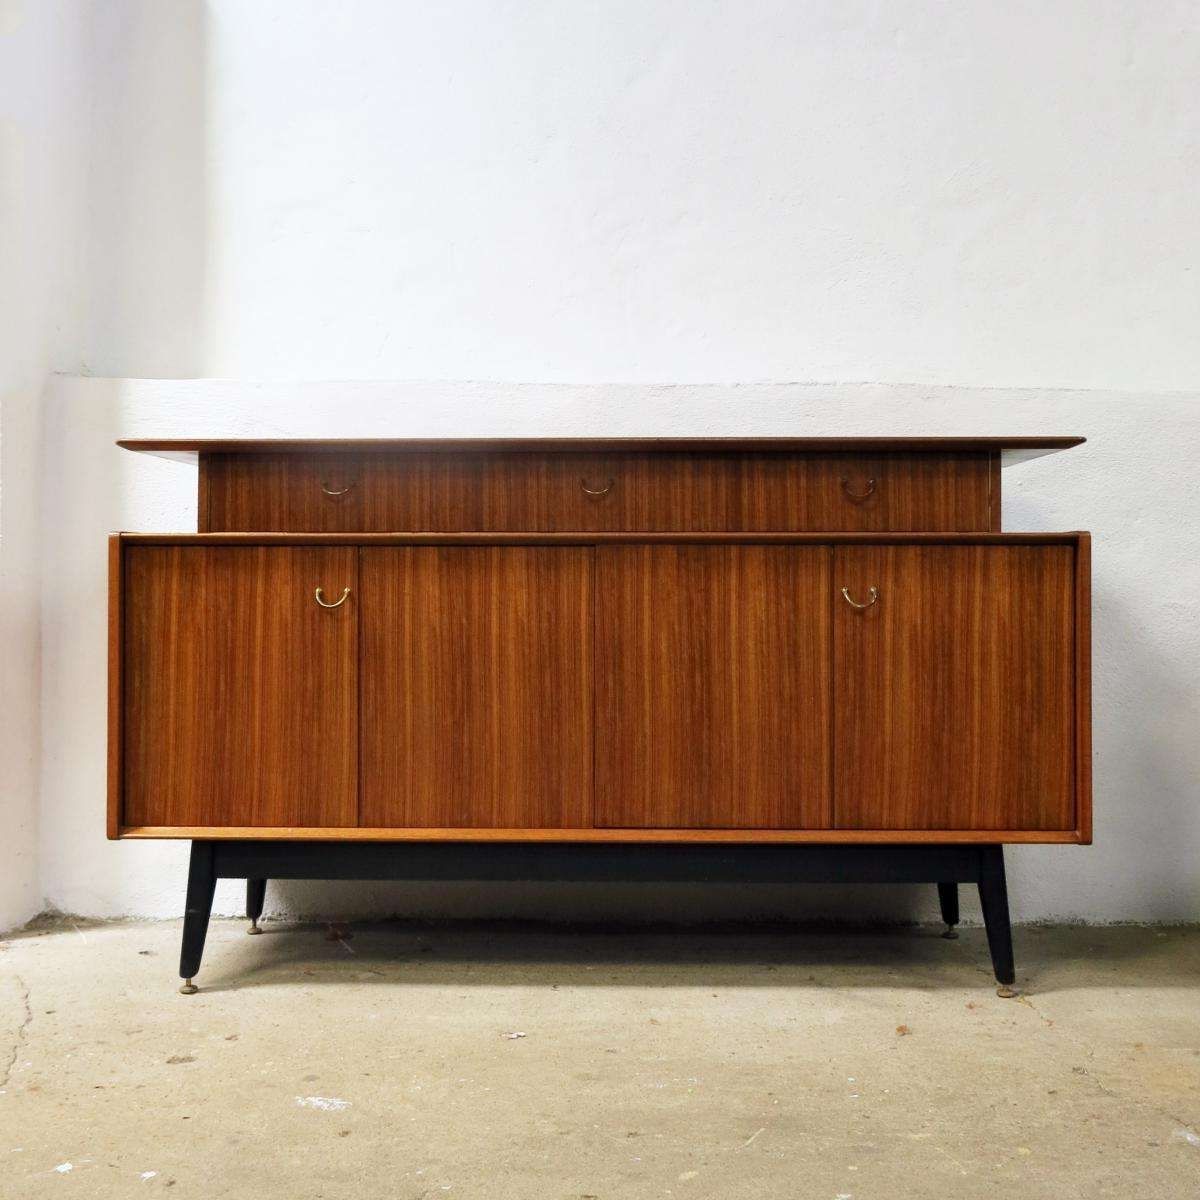 British Sideboard From G Plan, 1950s For Sale At Pamono Inside G Plan Sideboards (View 7 of 20)